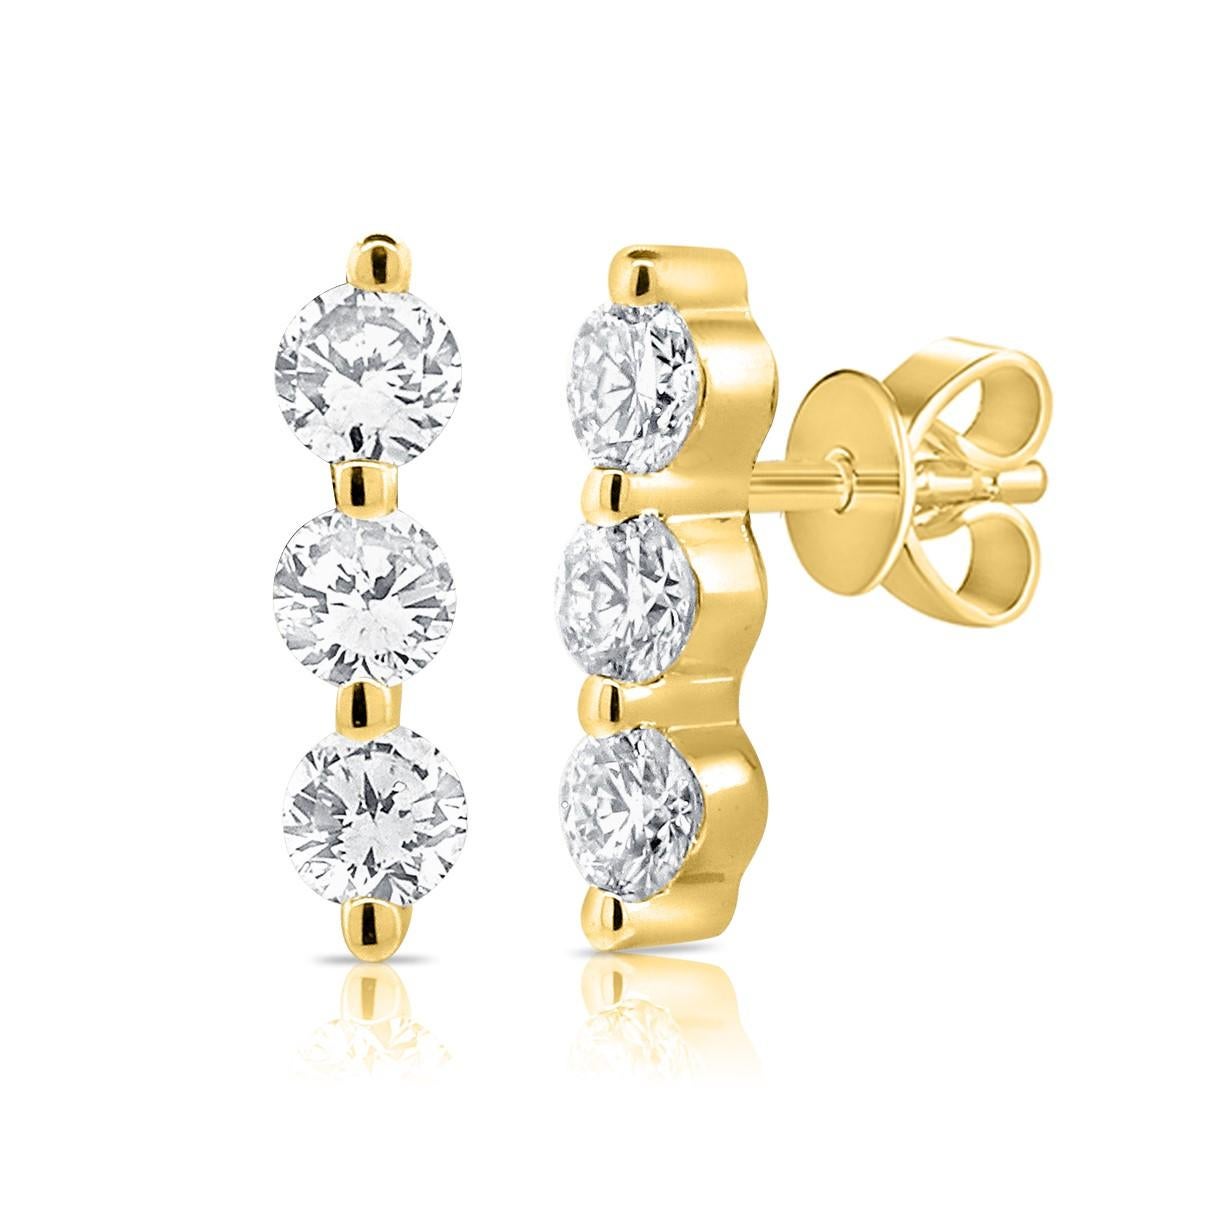 Baguette Cut 14K Yellow Gold Diamond 3 0.20ct Stone Bar Stud Earrings for Her For Sale